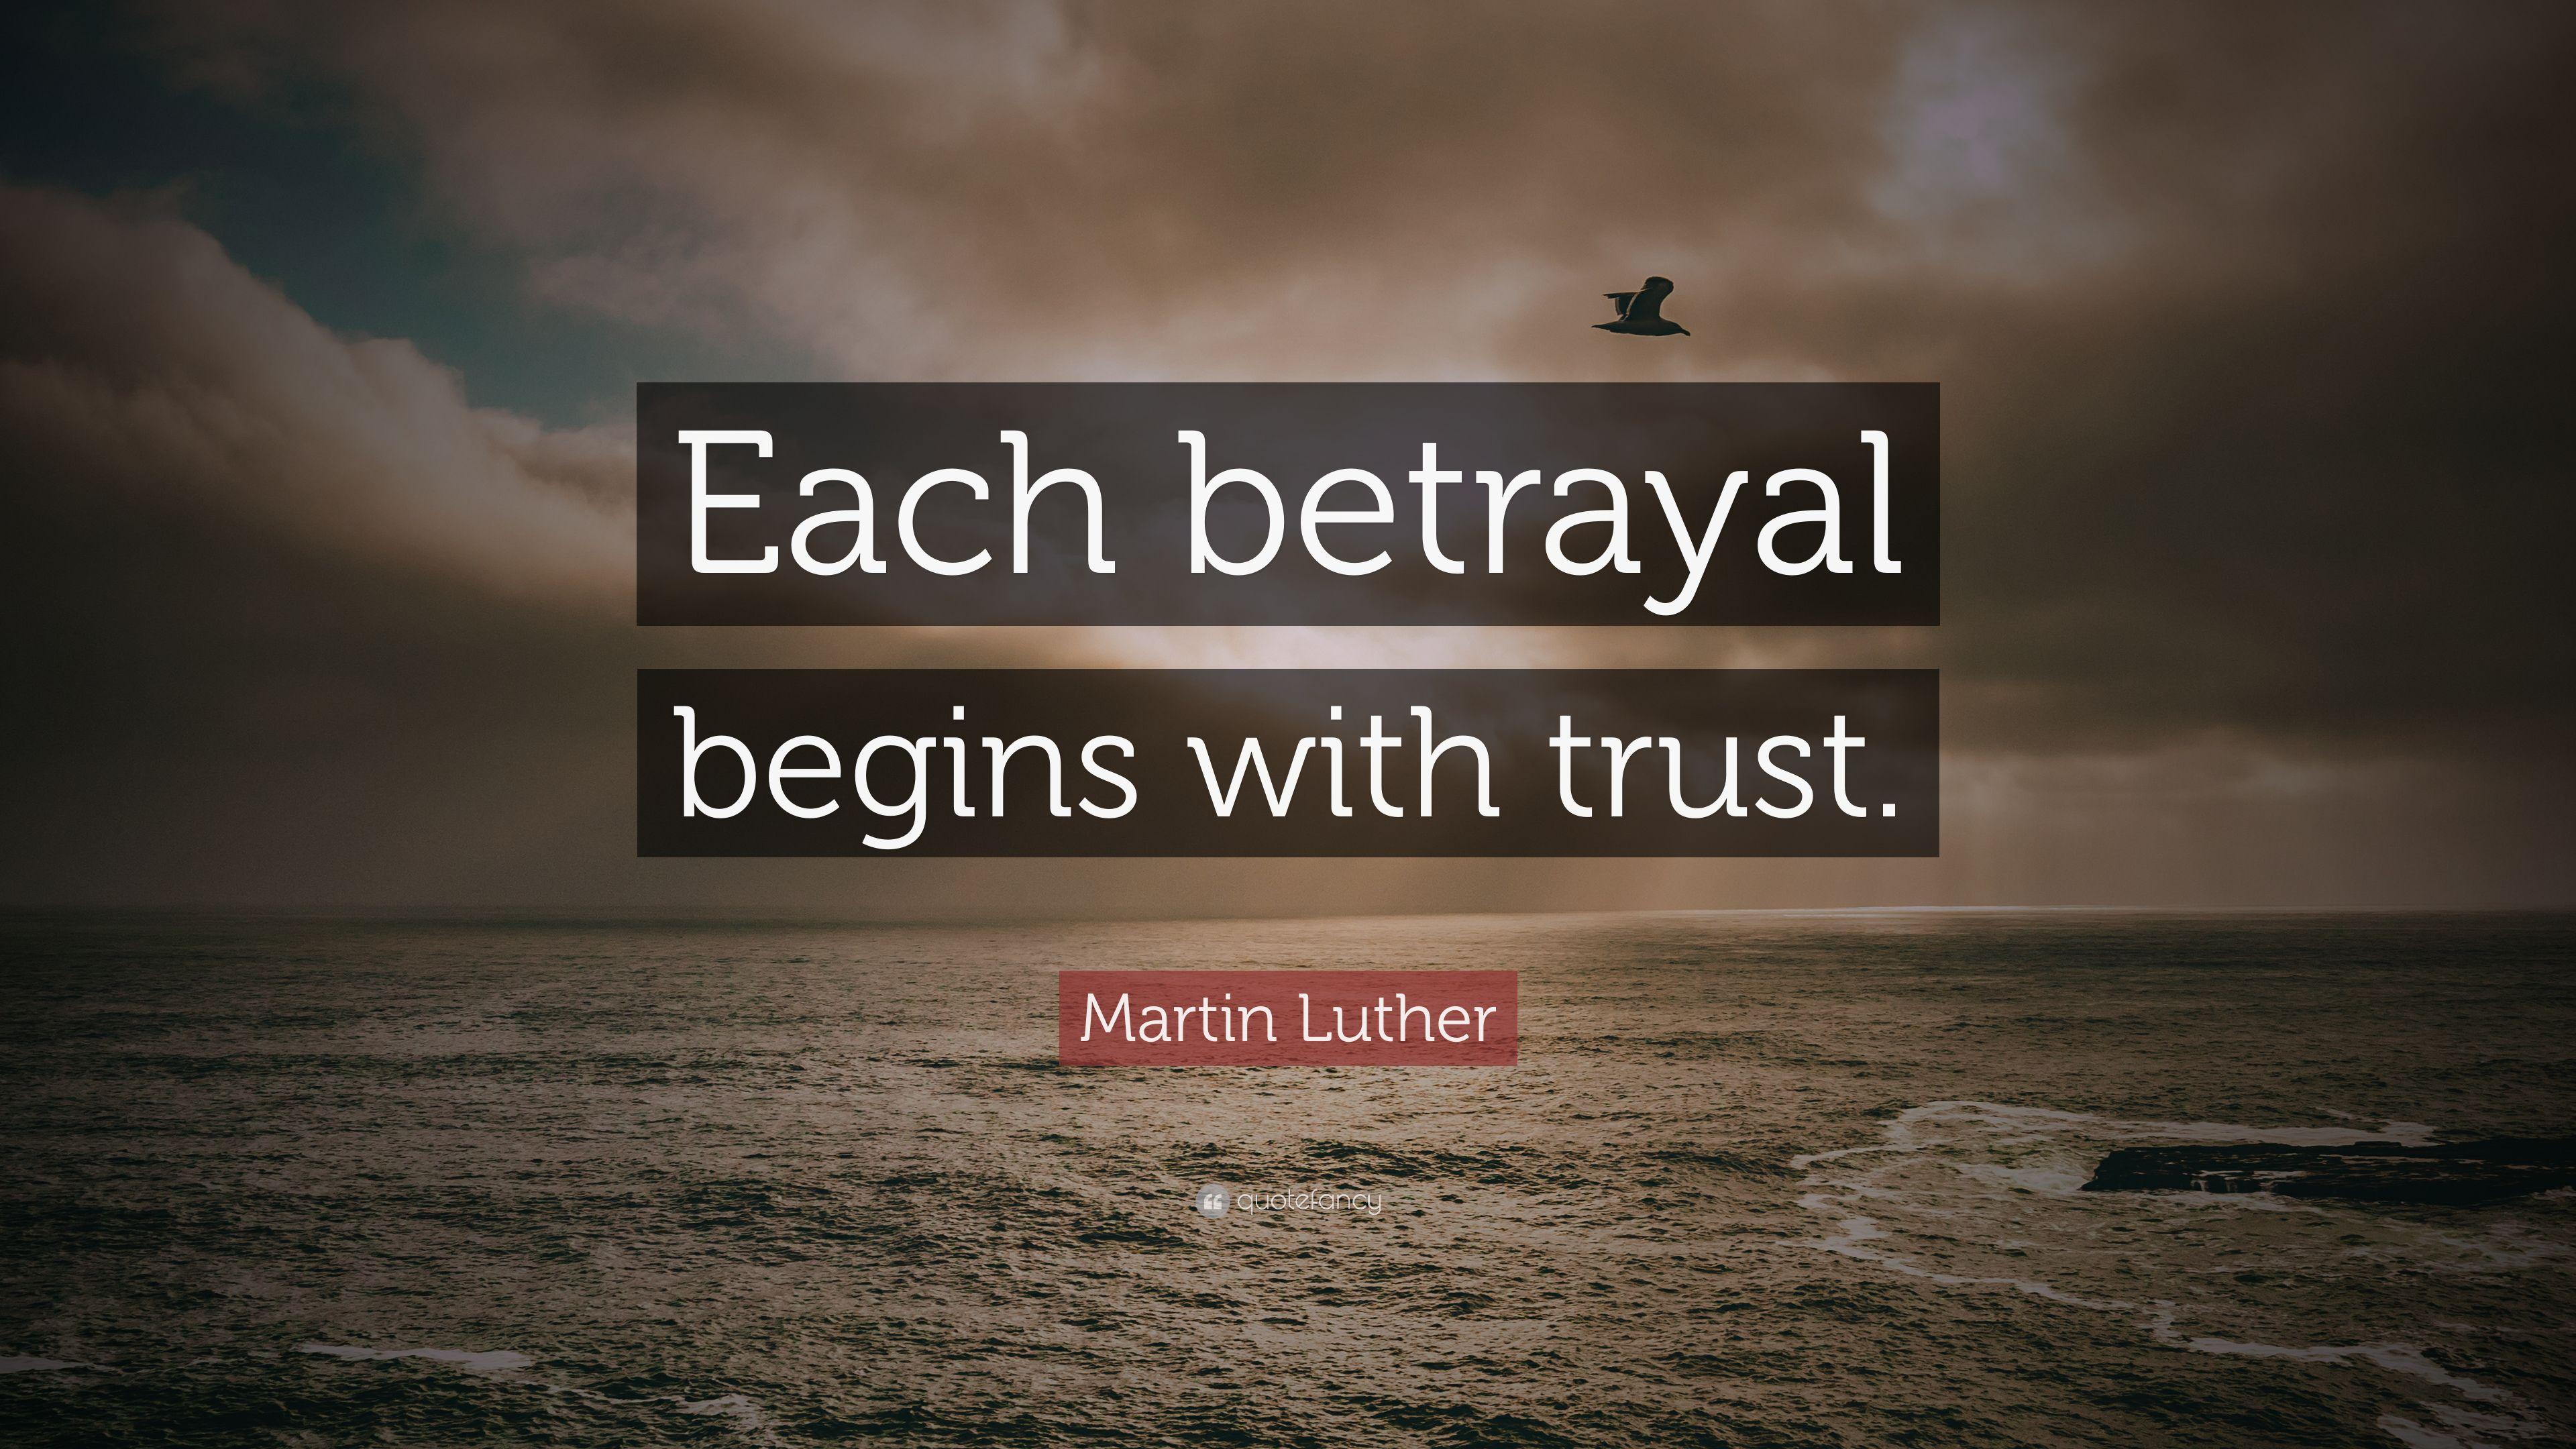 Martin Luther Quote: “Each betrayal begins with trust.” 12